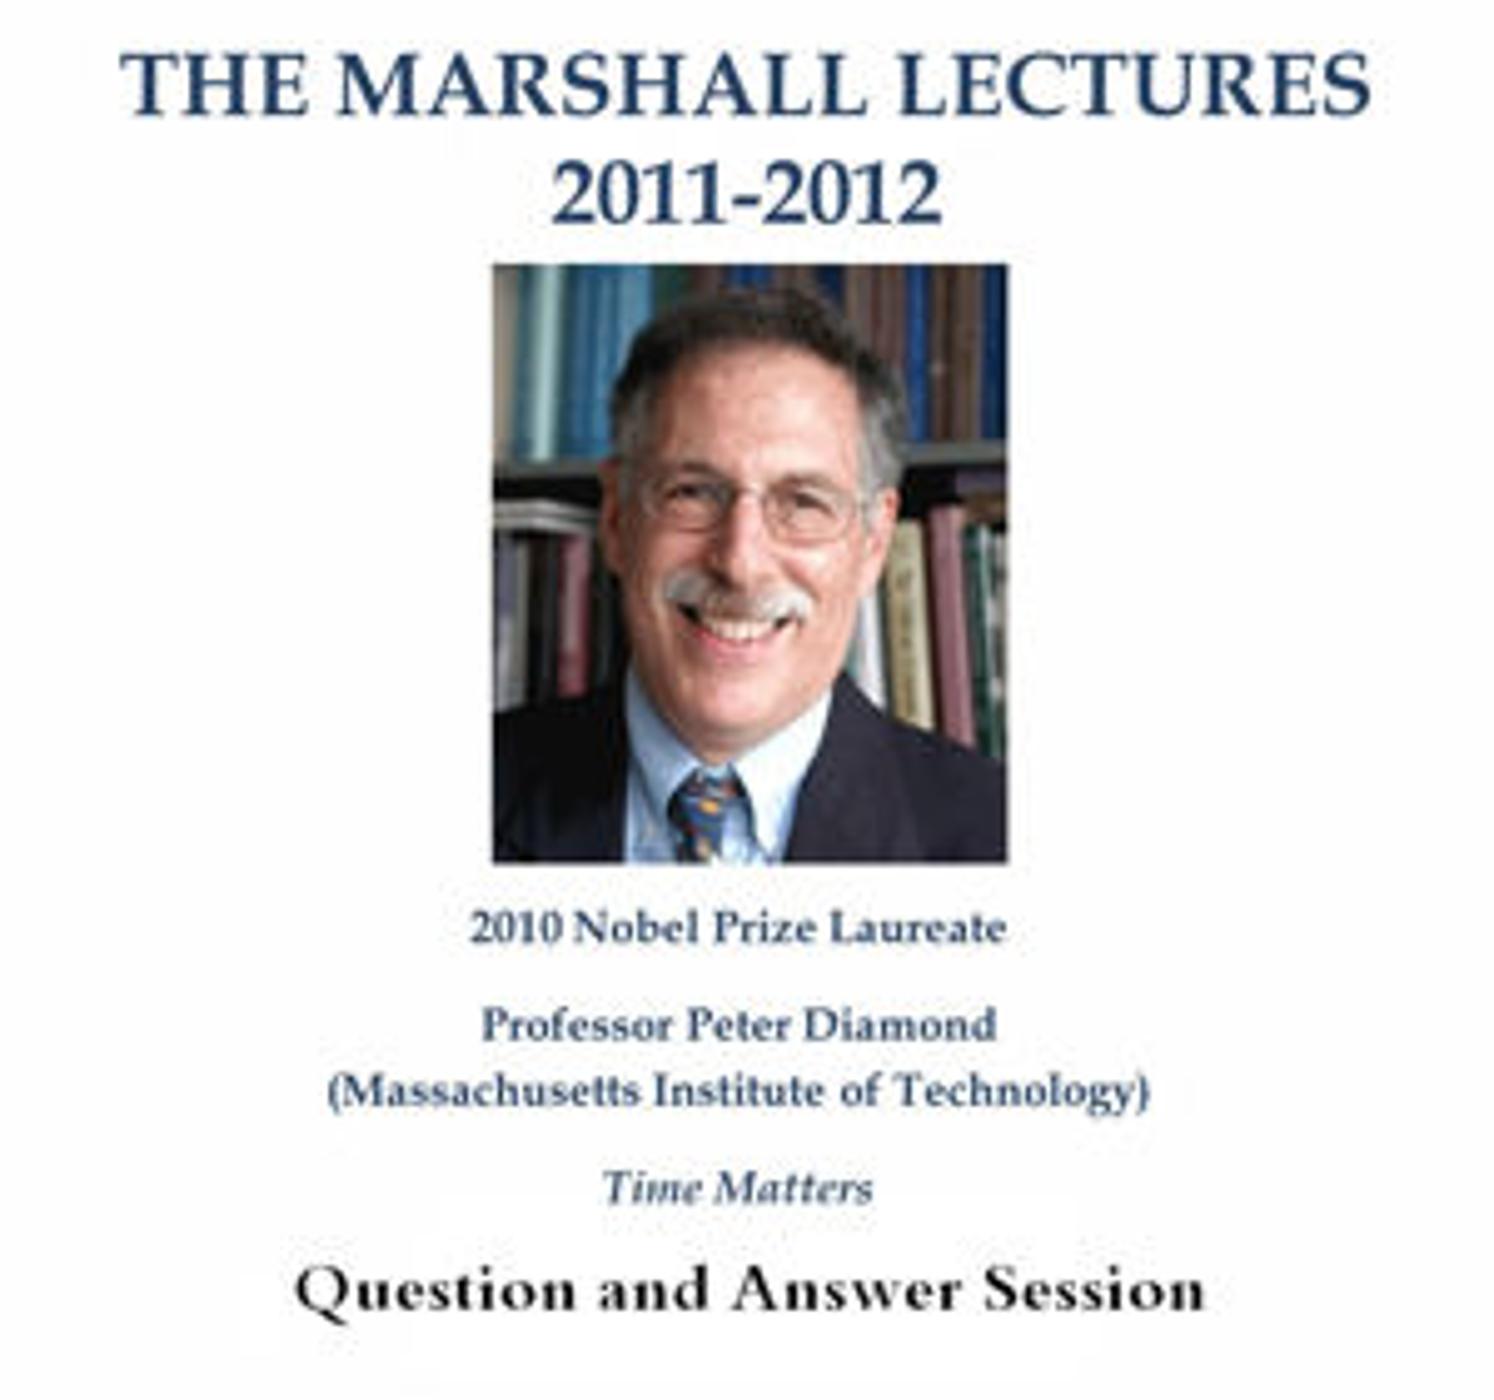 Marshall Lecture 2011-2012 - Professor Peter Diamond - Time Matters - Question and Answer Session